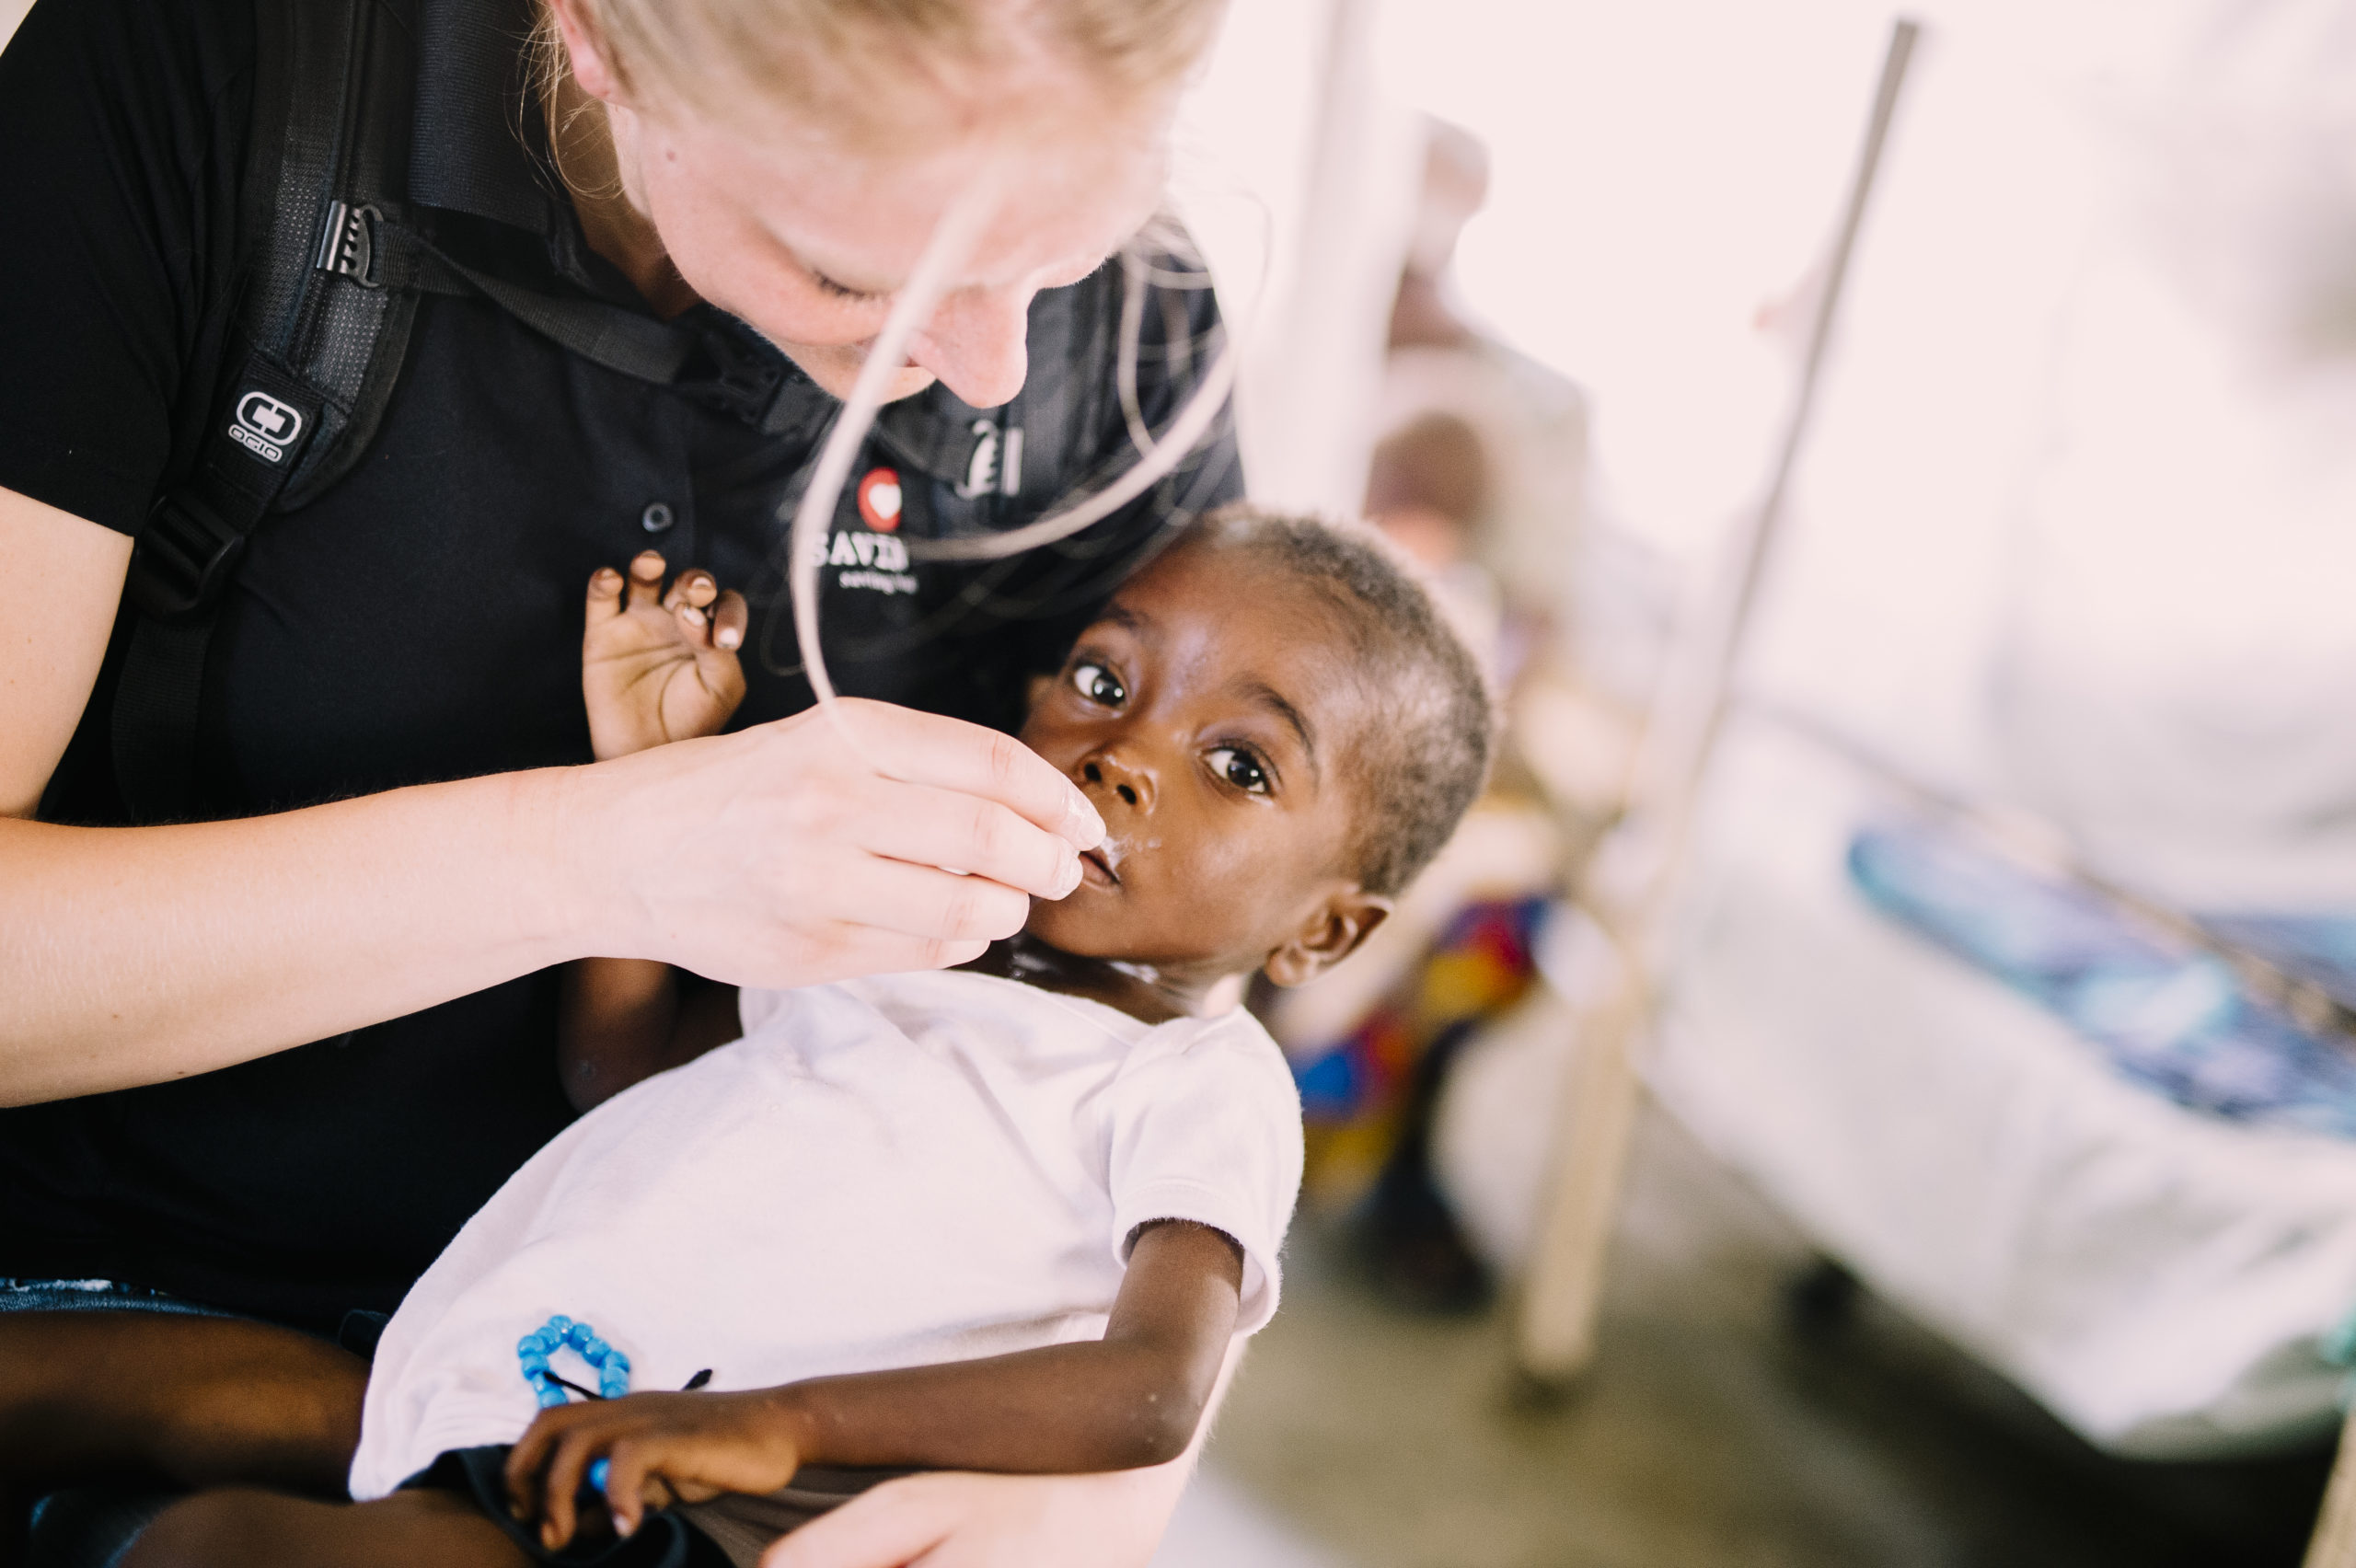 Why Should I Care About Babies Across the World? Executive Director, Heidi Cortez, feeding therapeutic milk to a malnourished baby in Angola.